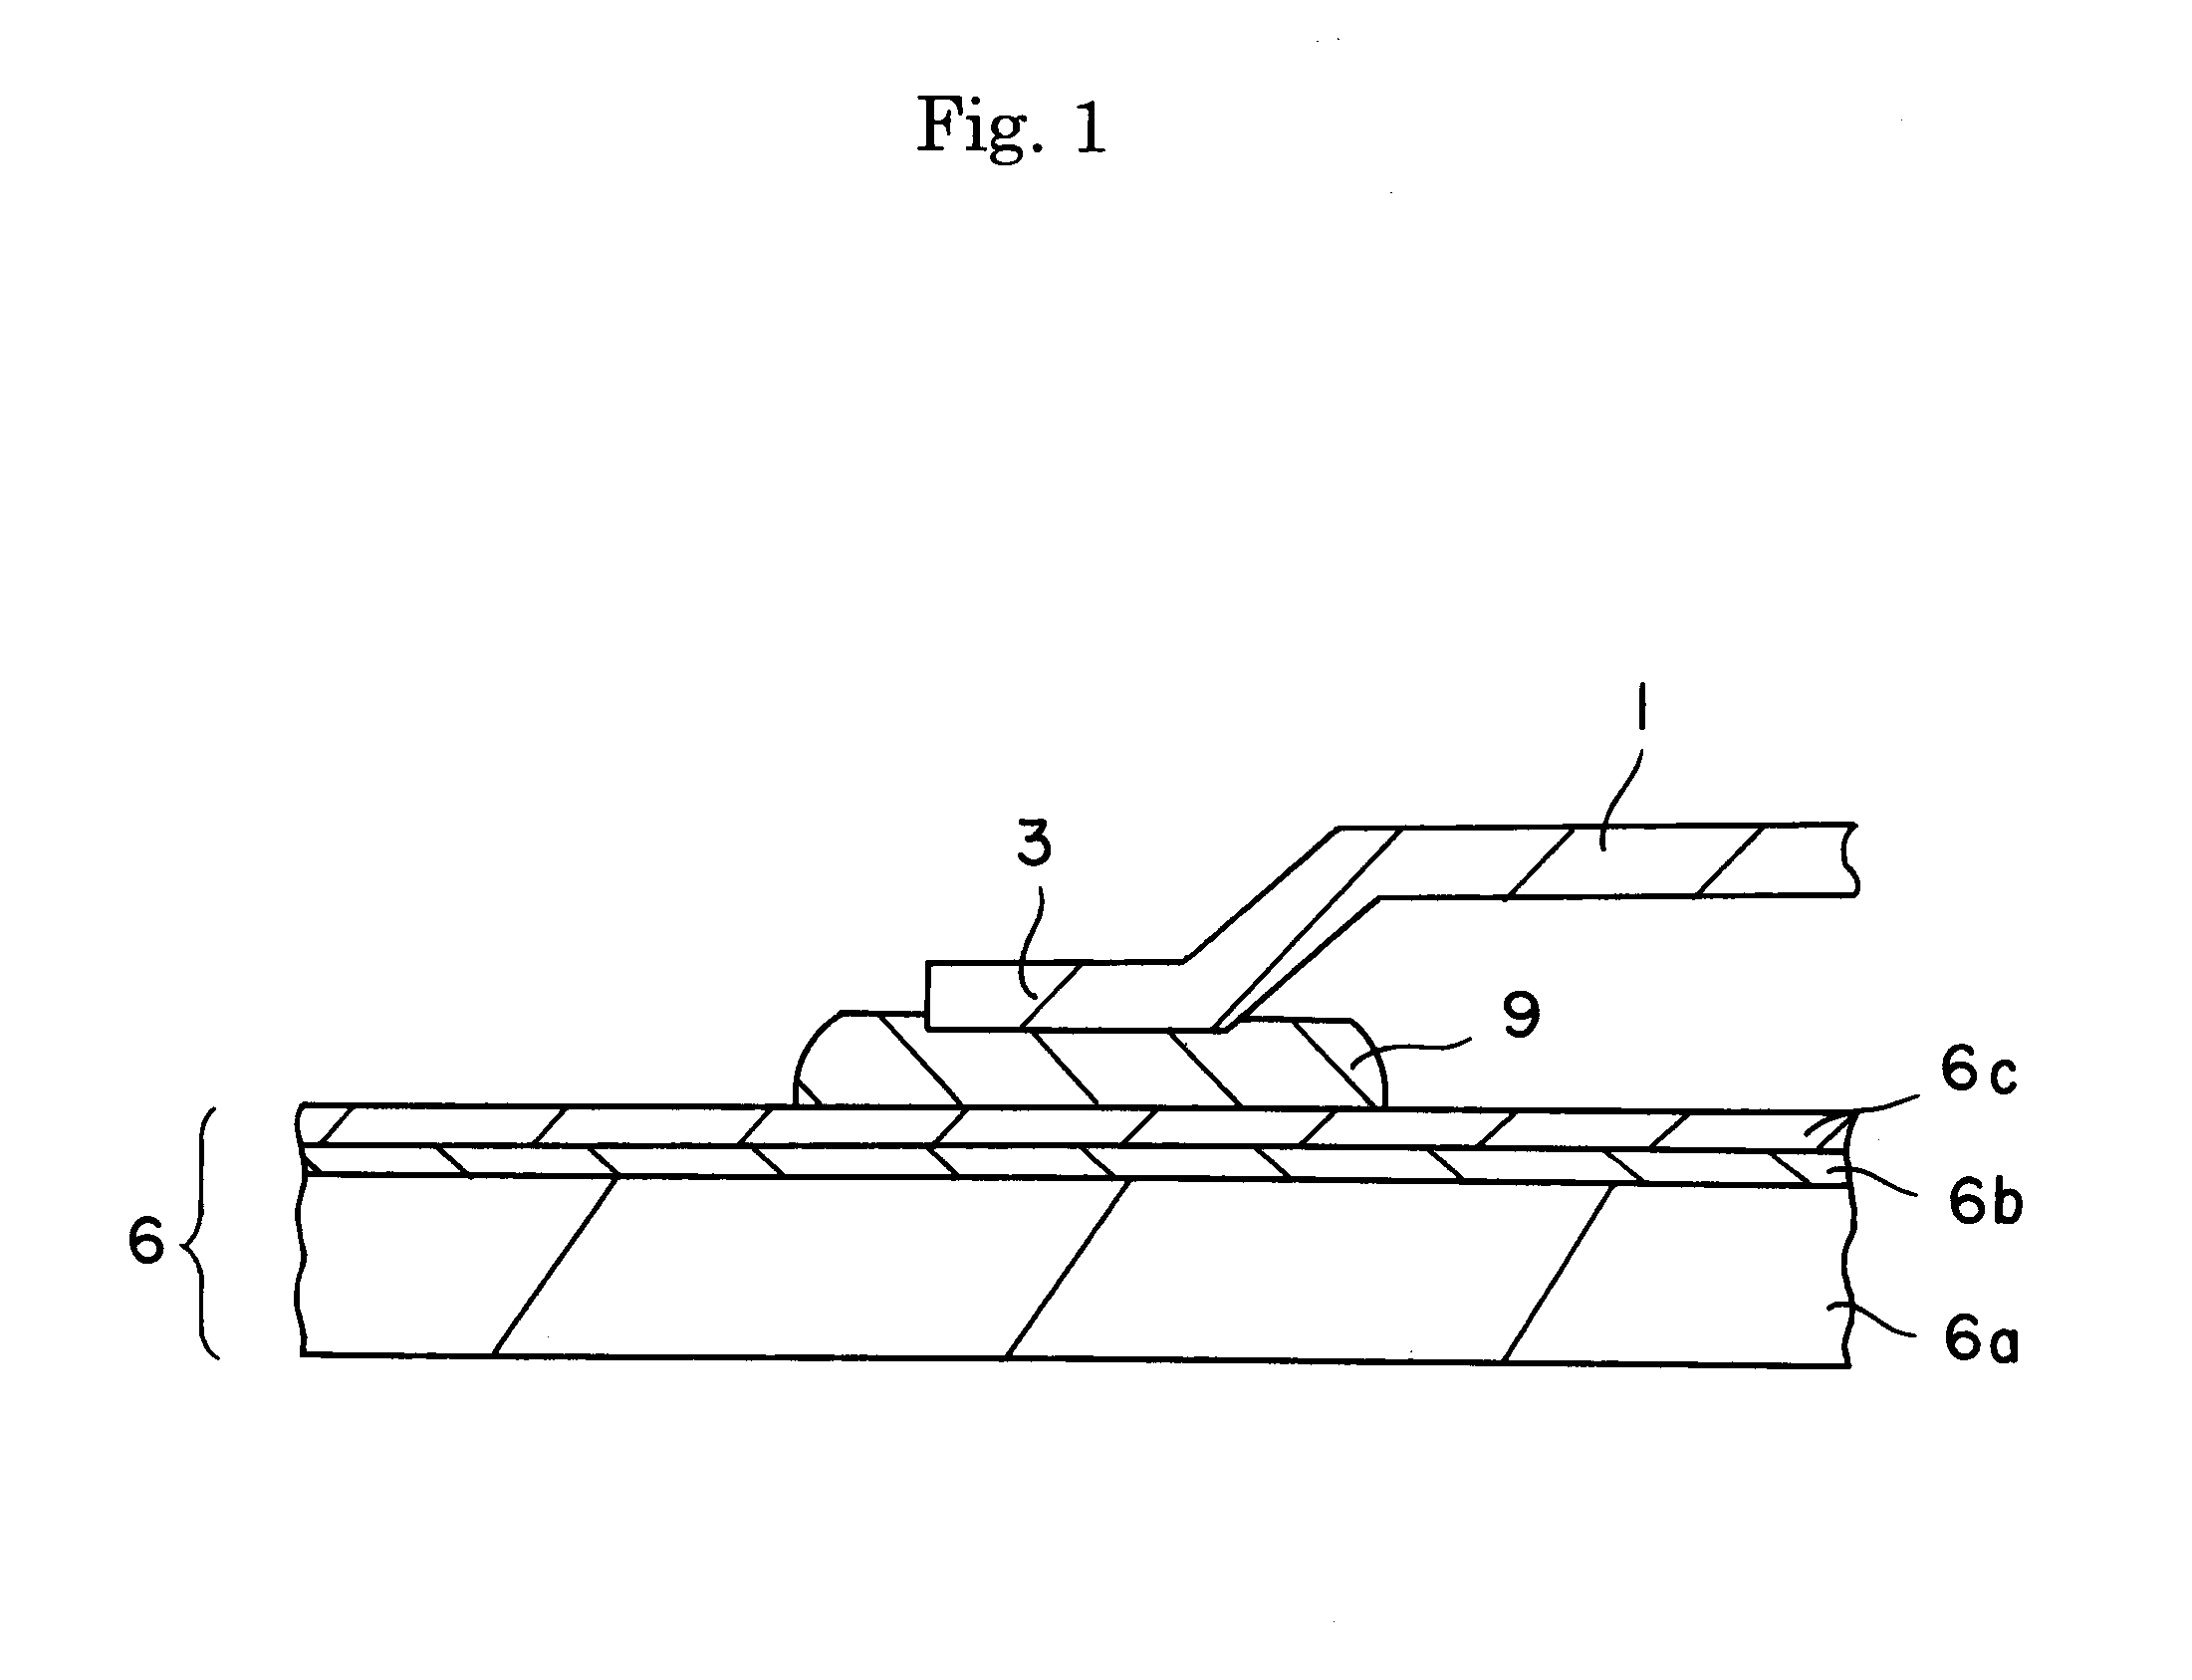 Method of manufacturing transition metal oxide having spinel structure